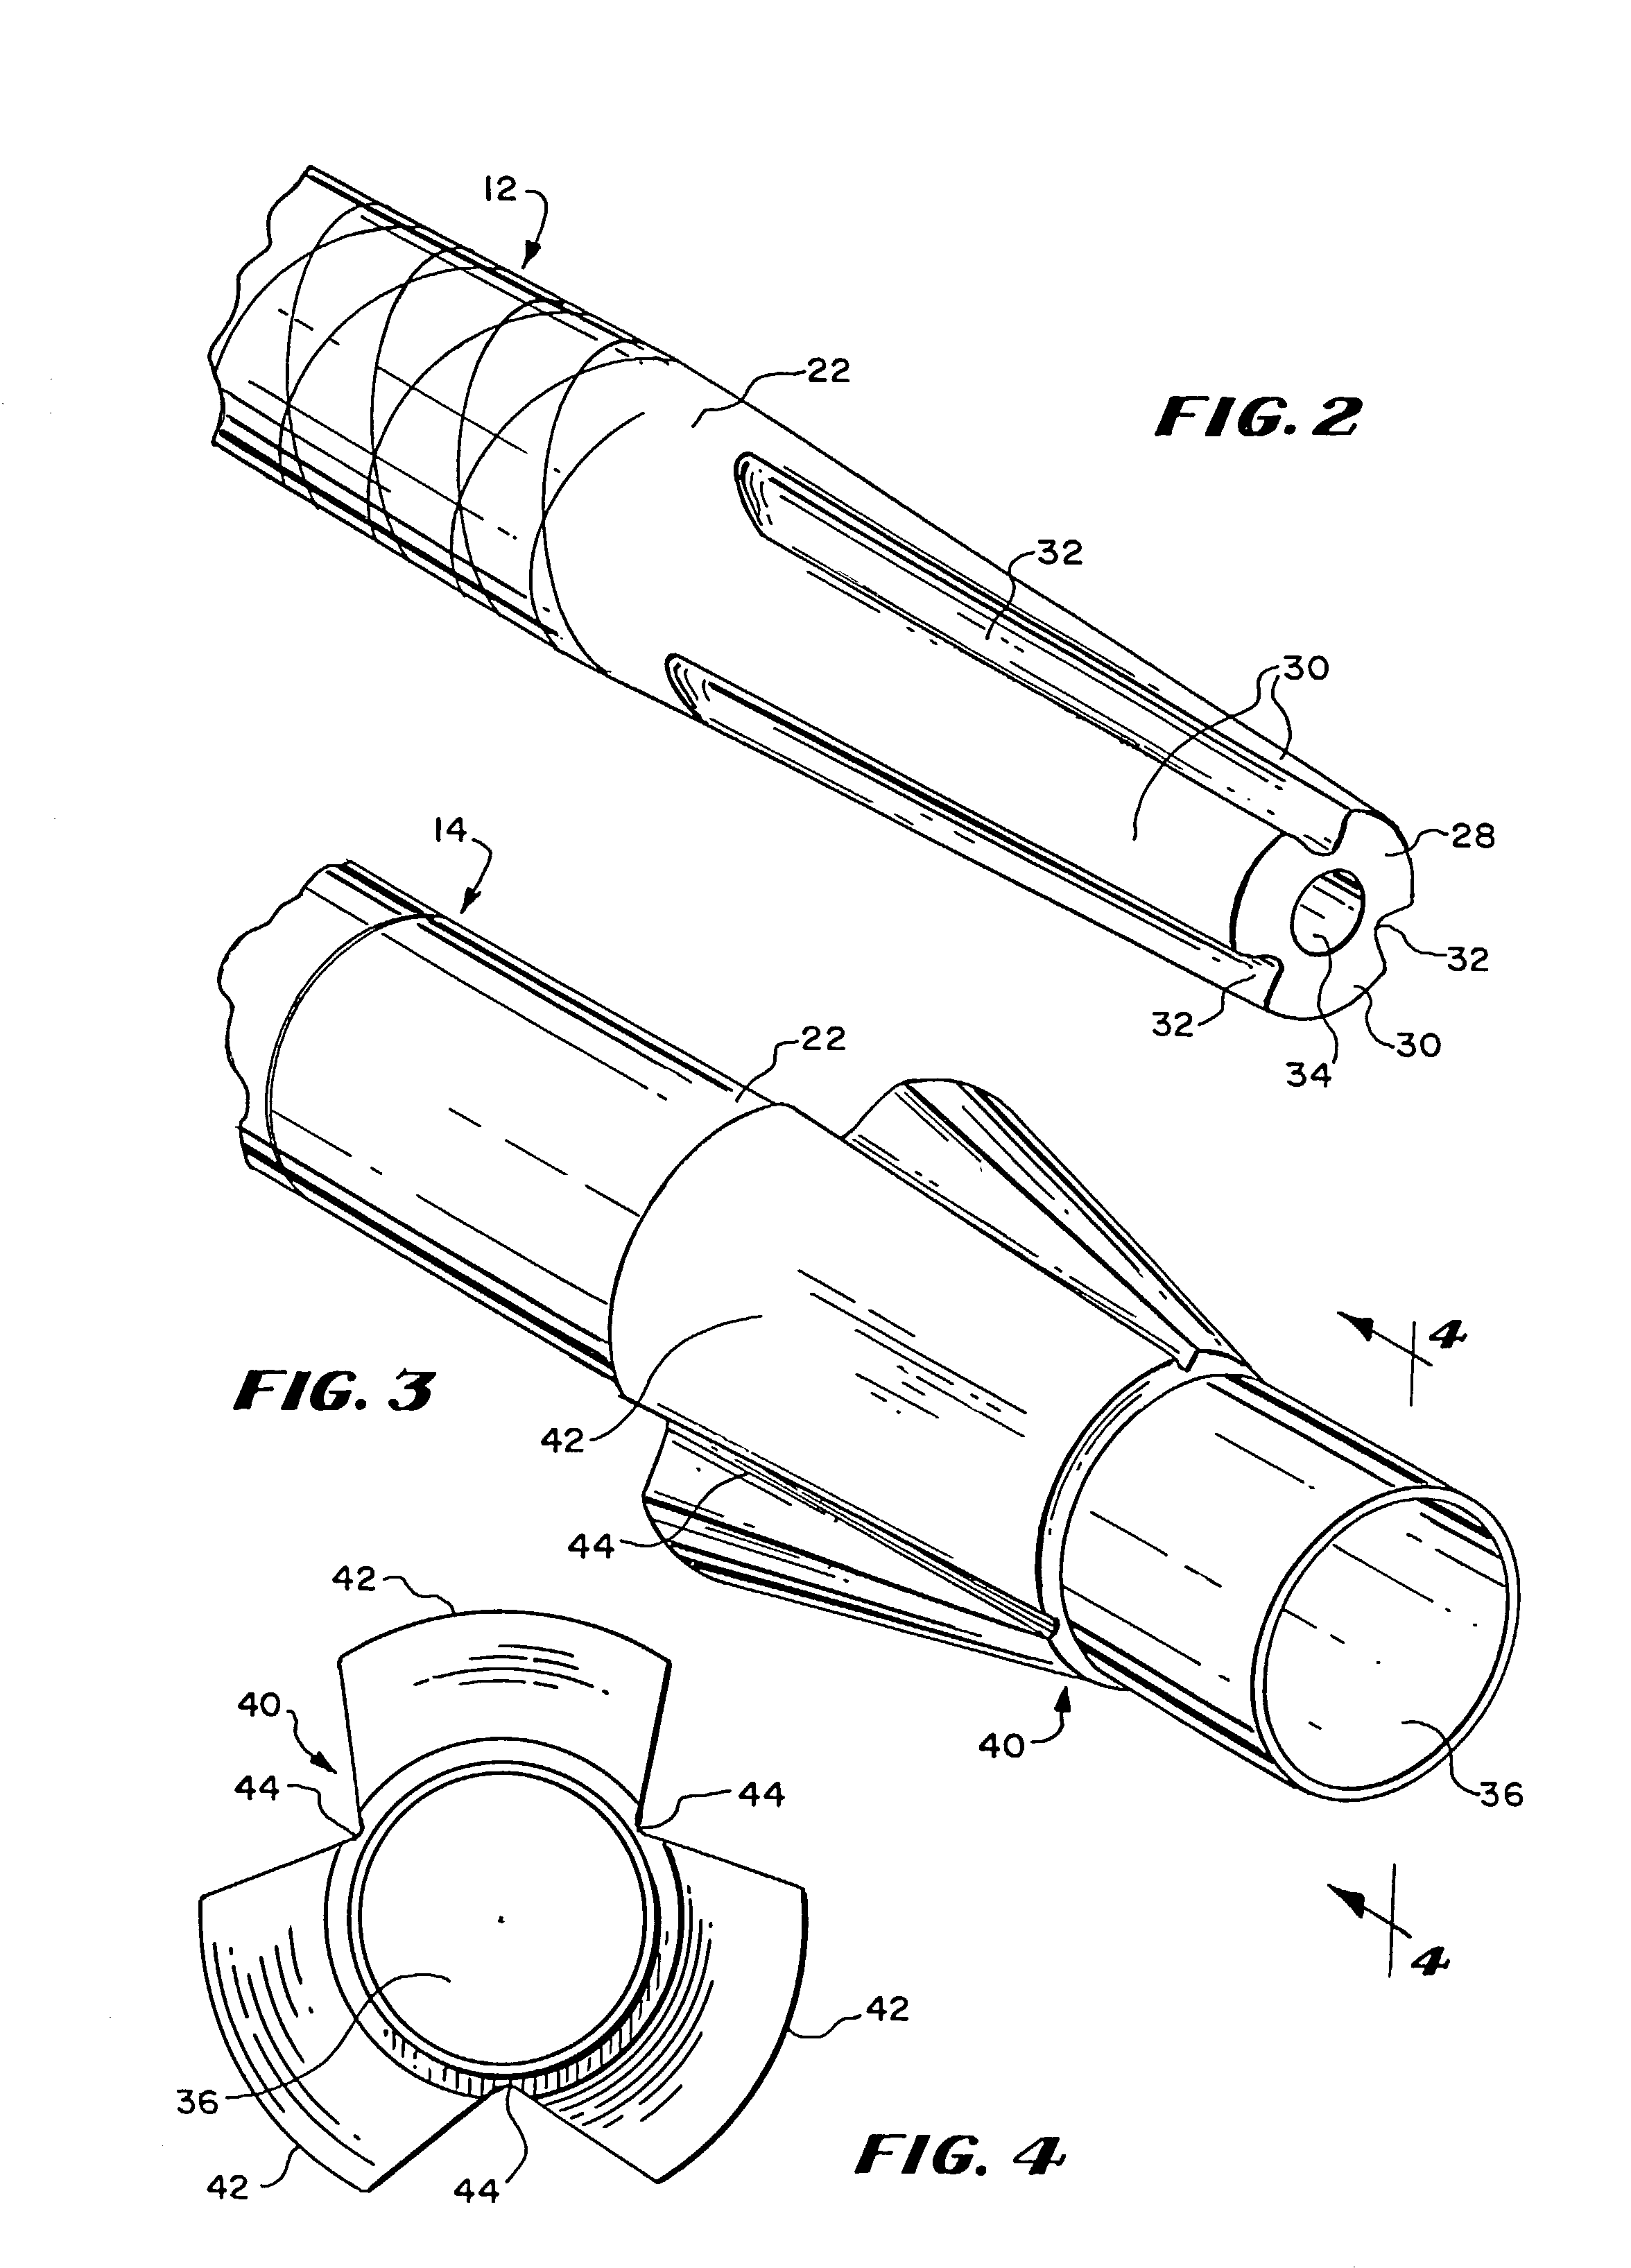 Slip-fit handle for hand-held instruments that access interior body regions